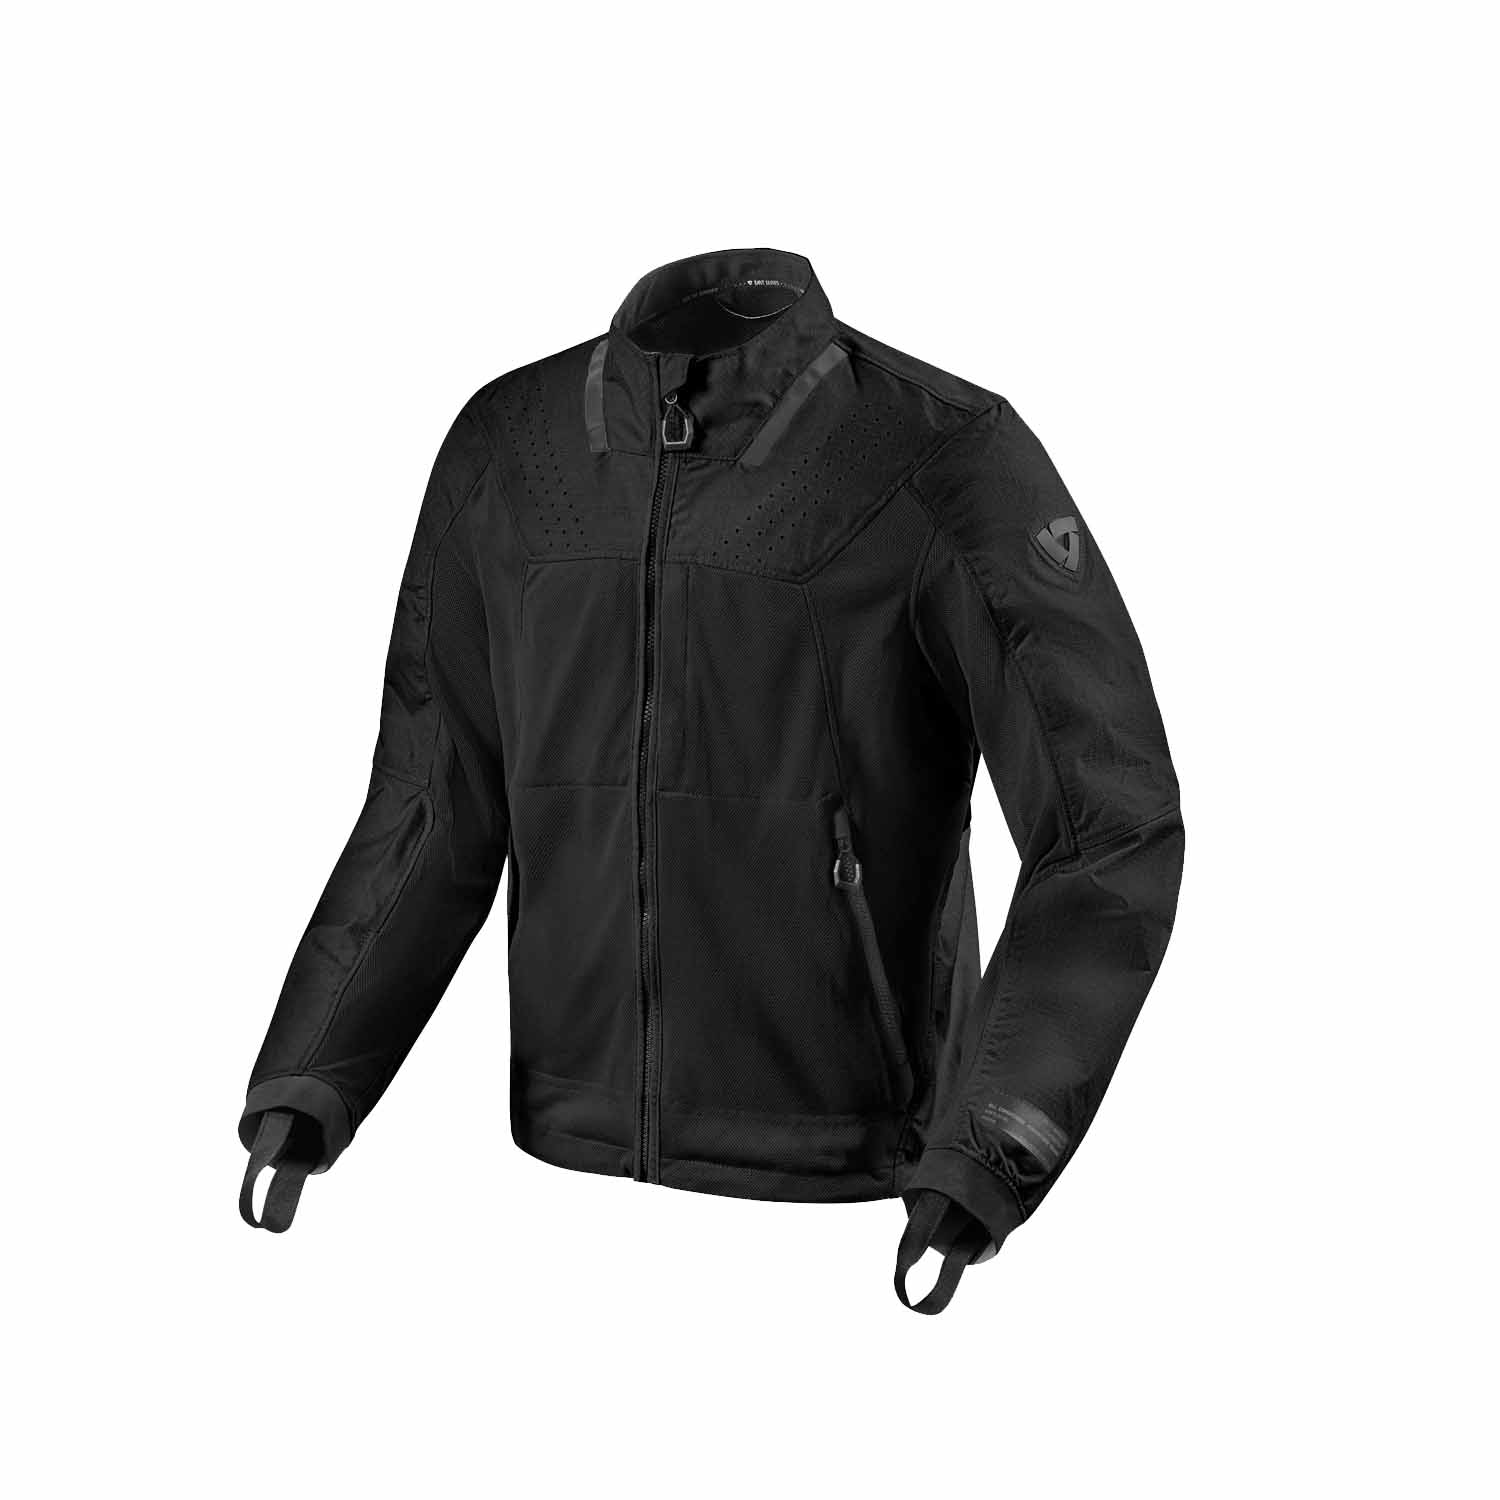 Image of REV'IT! Territory Jacket Black Standard Taille M